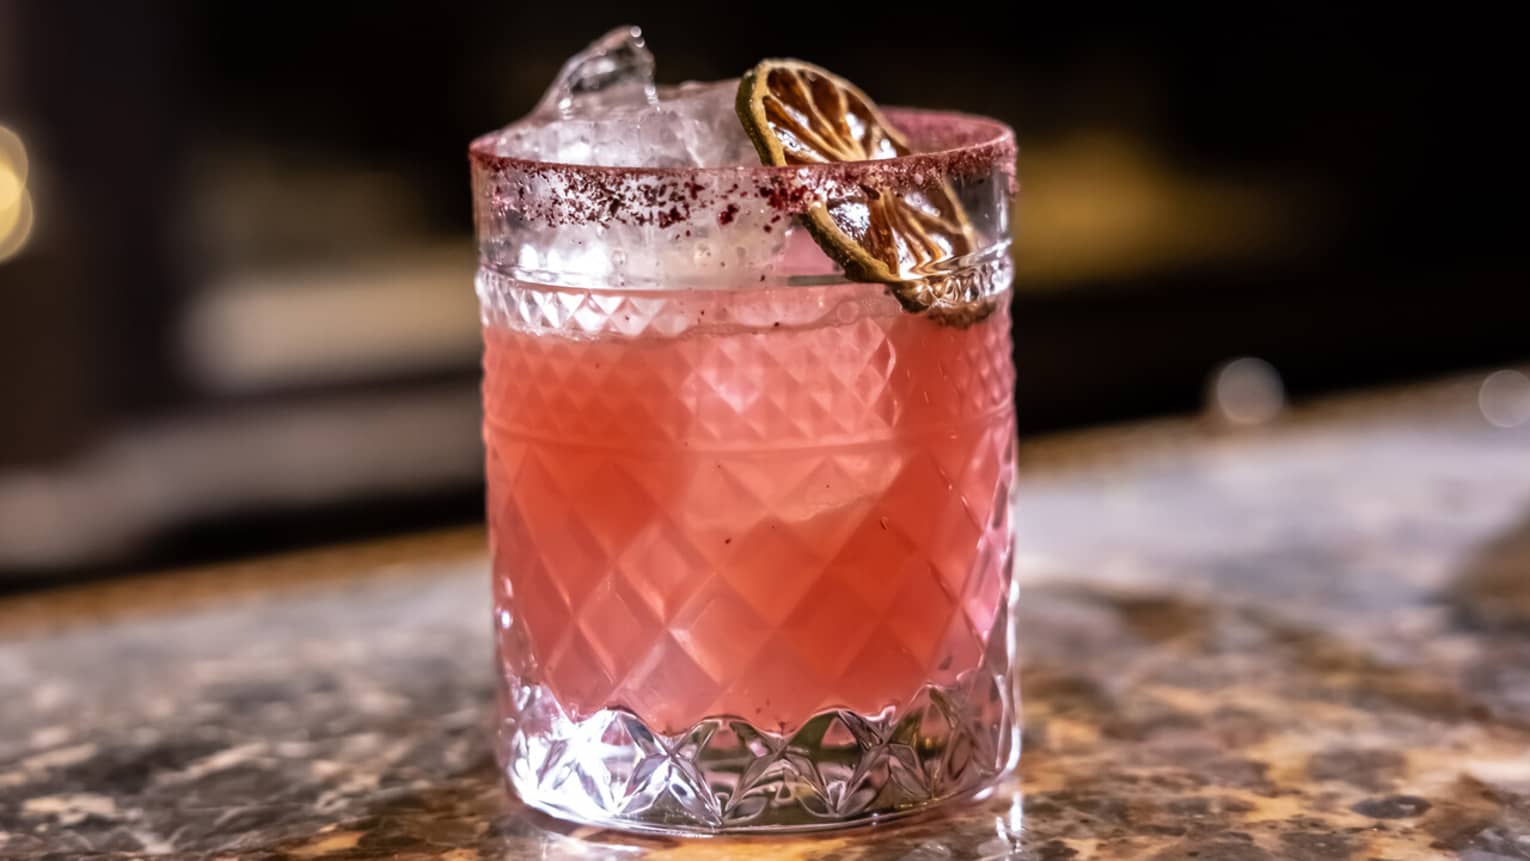 A pale pink cocktail garnished with dried citrus slice